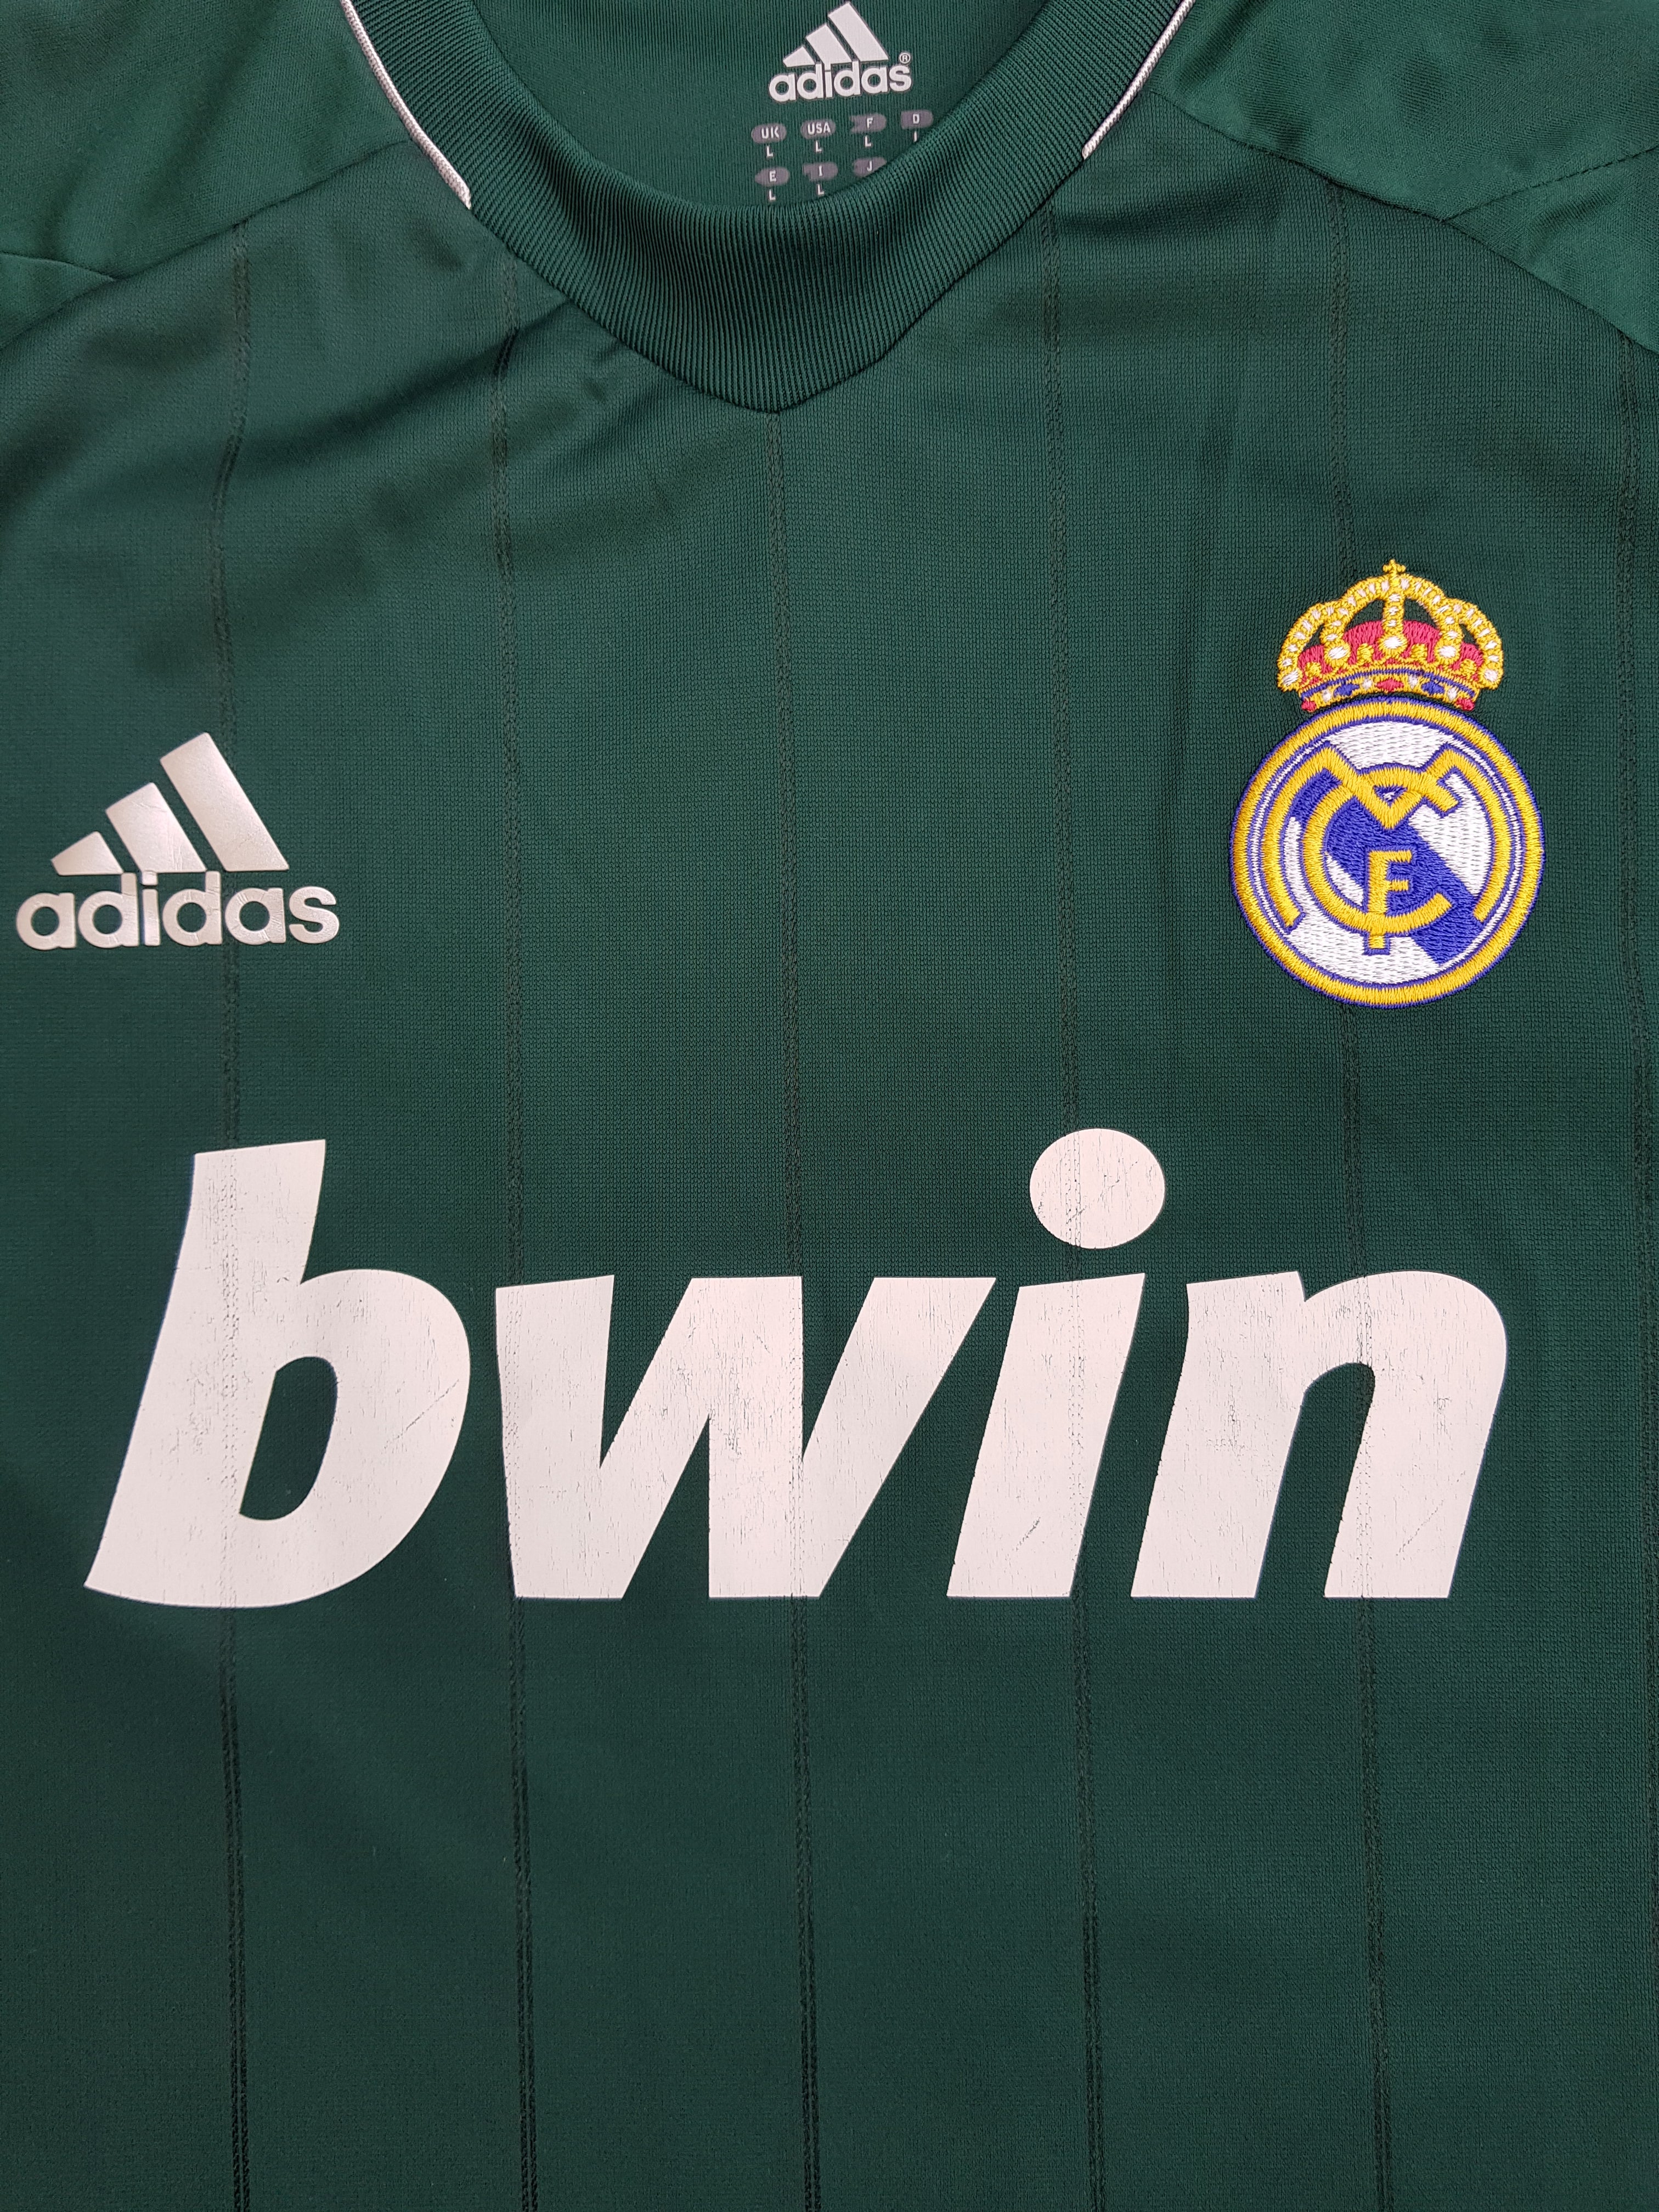 2012/13 Real Madrid Home Shirt (Excellent) - XL